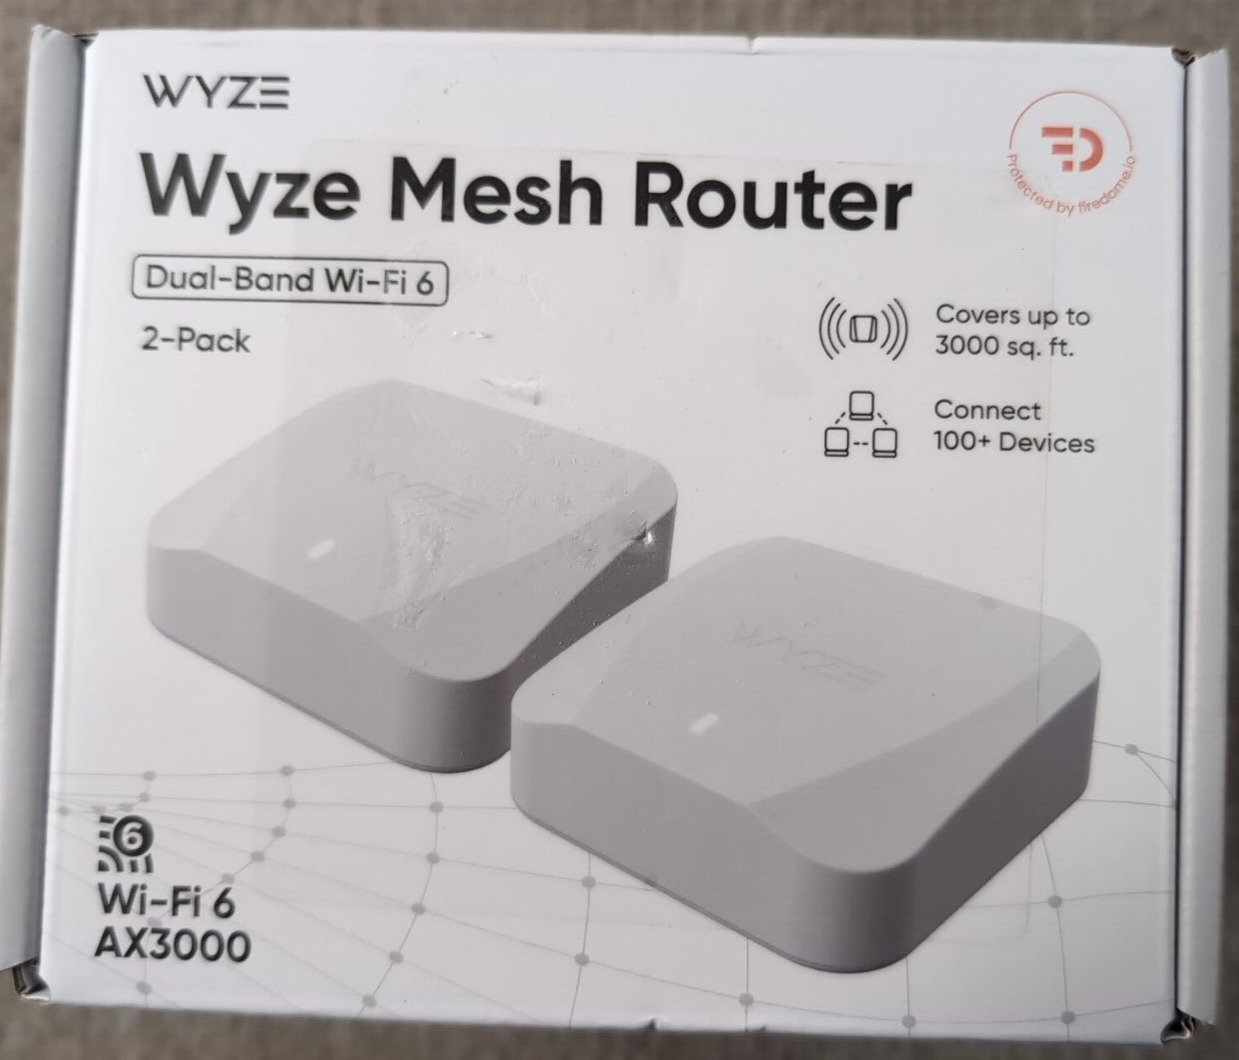 Wyze AX3000 Dual-Band Wi-Fi 6 Mesh Router - White 2-Pack